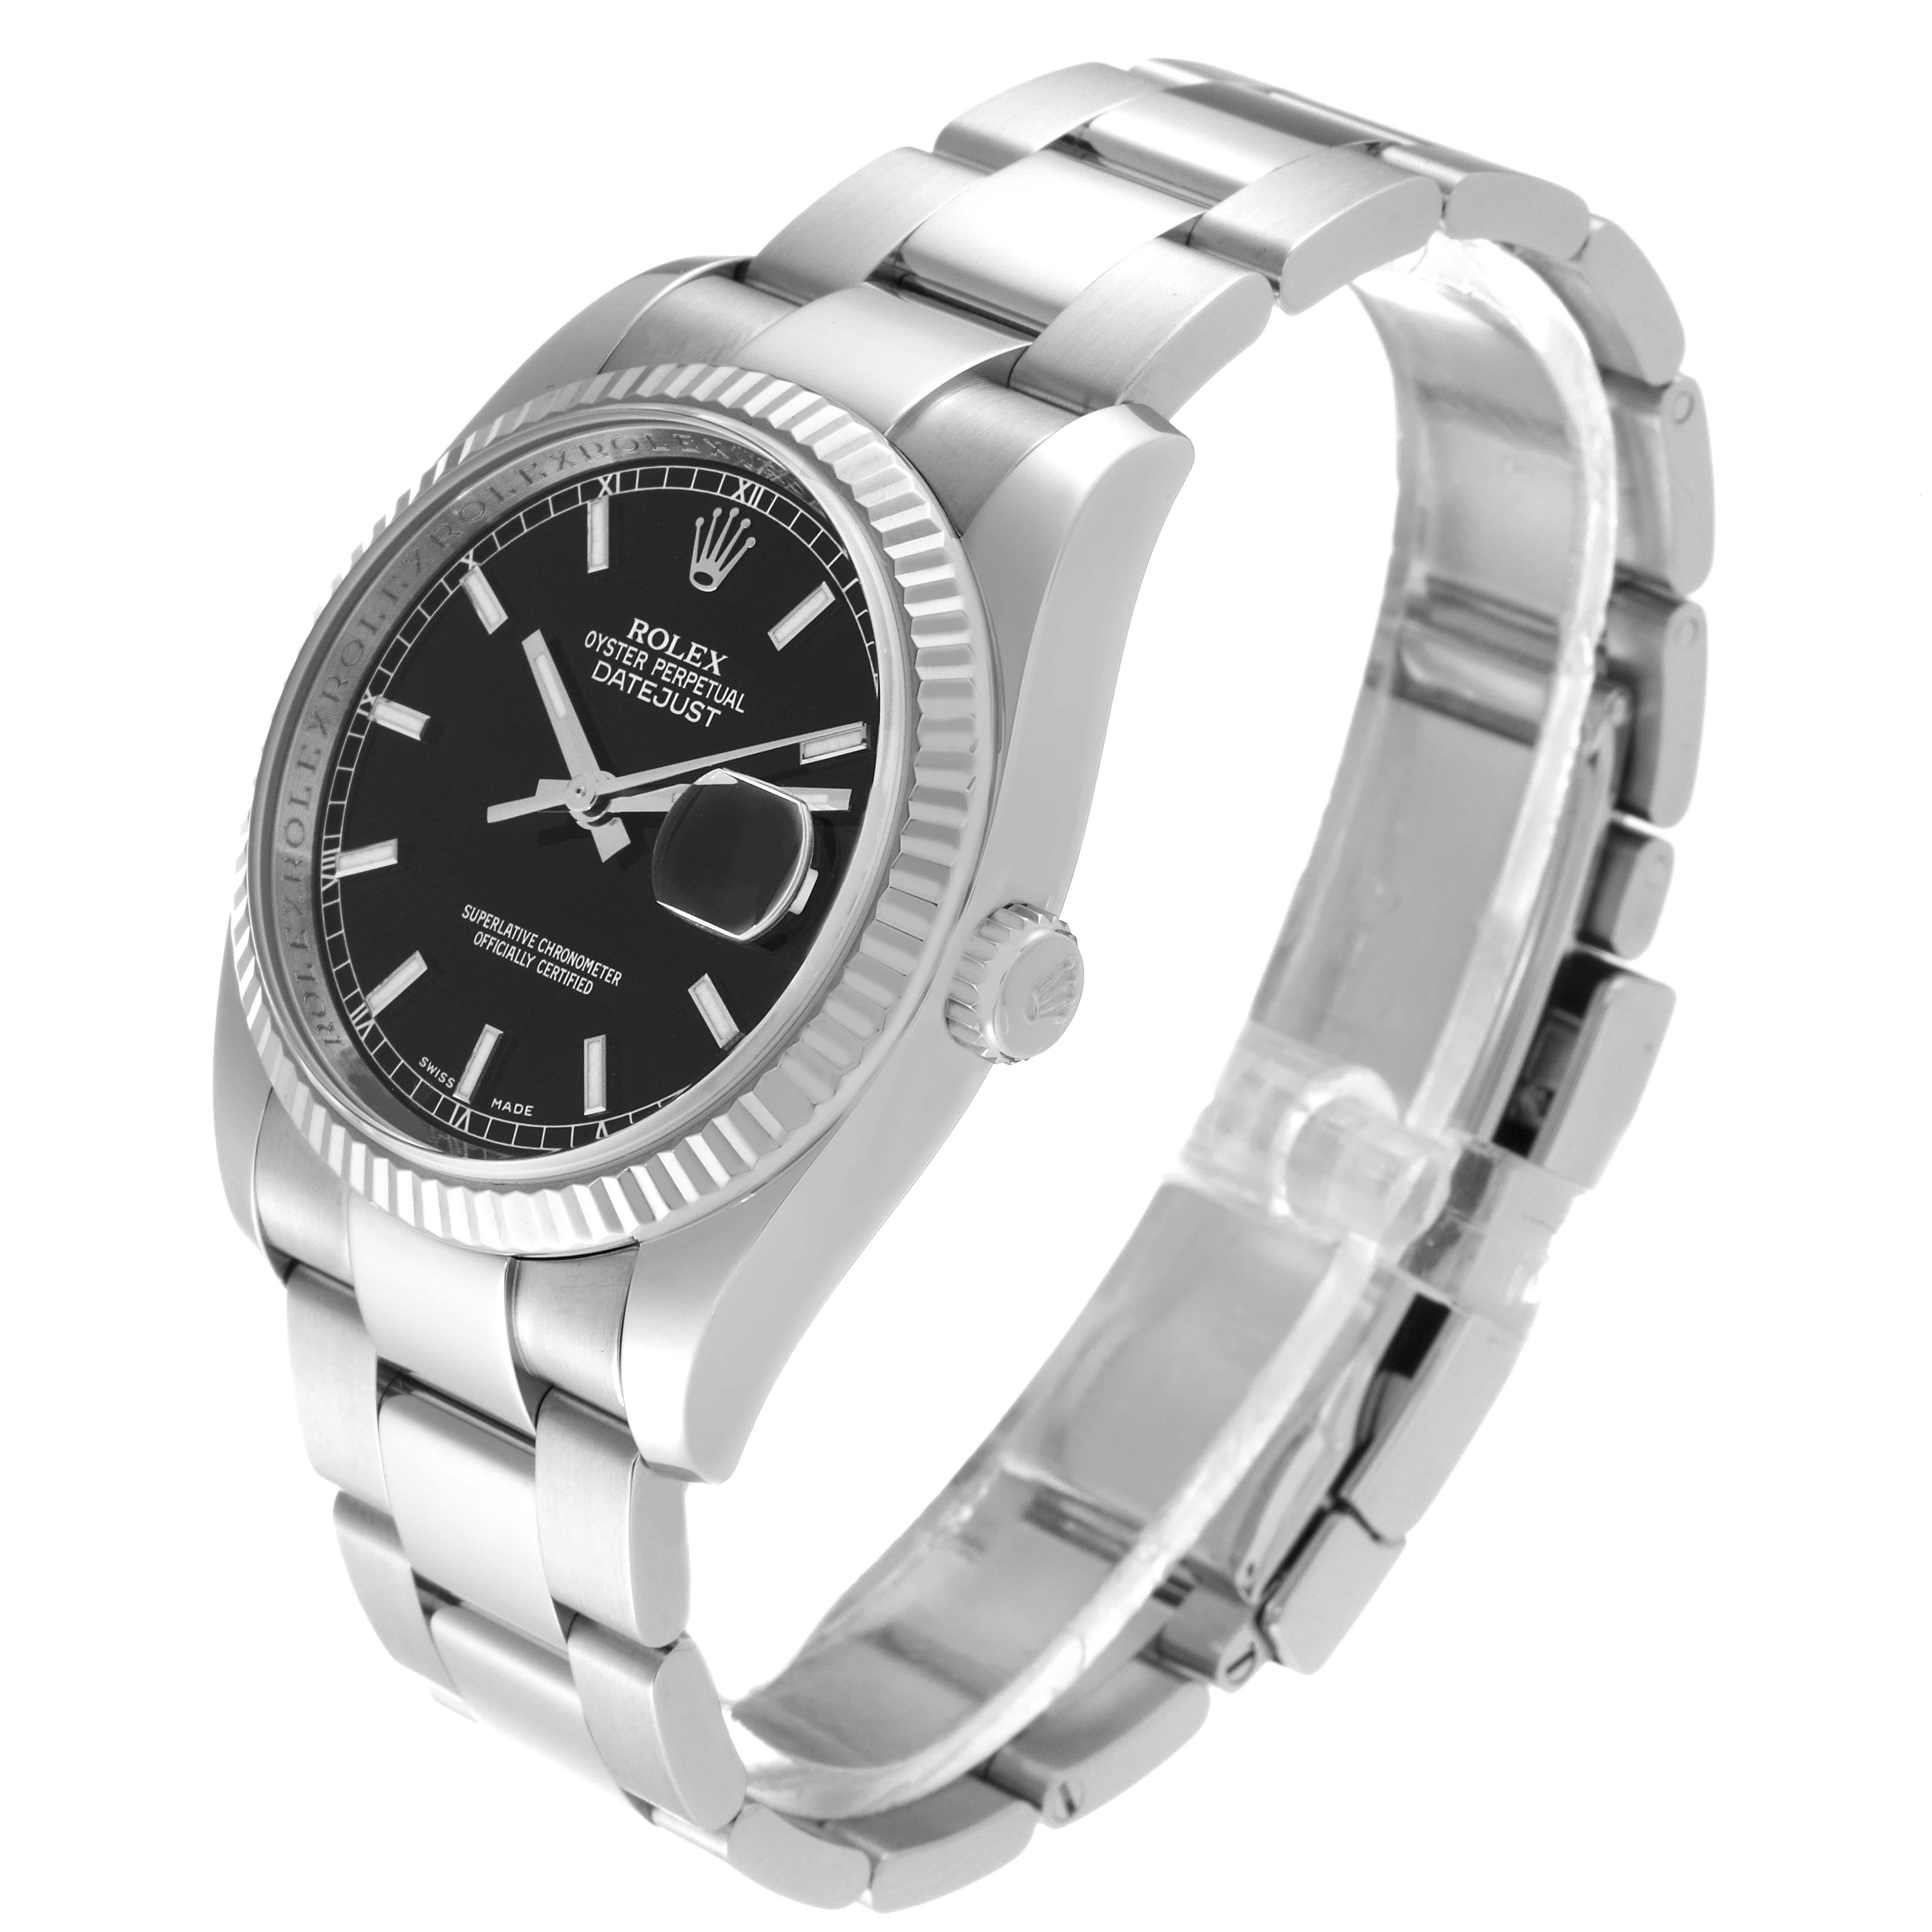 Rolex Datejust Steel White Gold Fluted Bezel Black Dial Mens Watch 116234 In Excellent Condition For Sale In Atlanta, GA